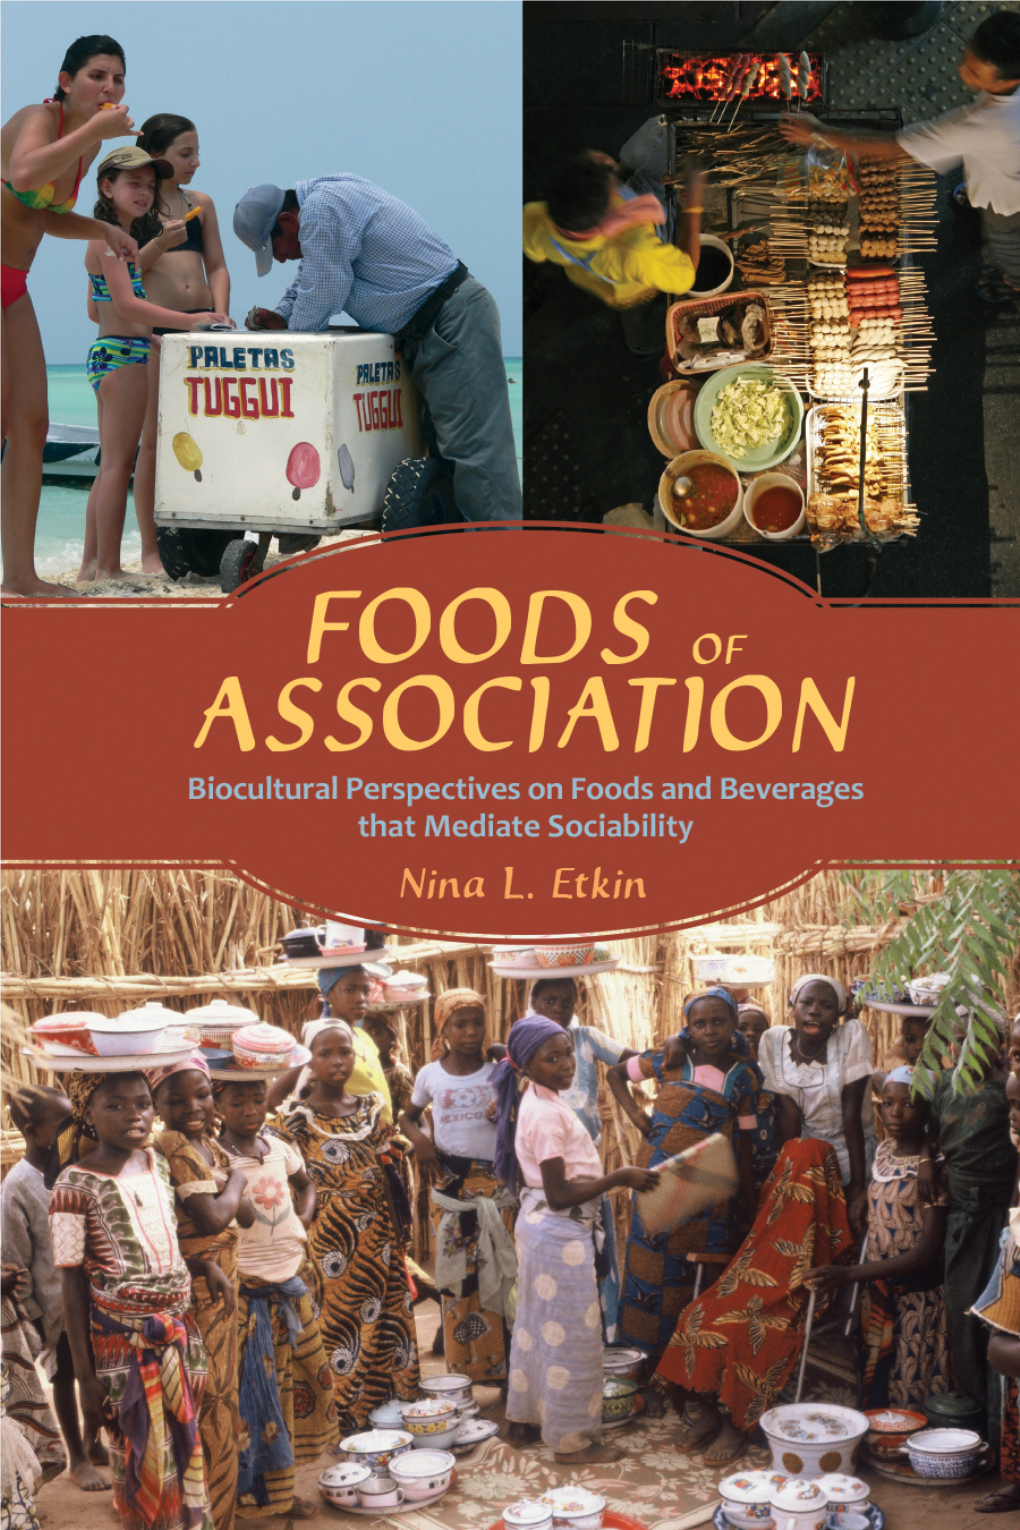 Biocultural Perspectives on Foods and Beverages That Mediate Sociability Nina L